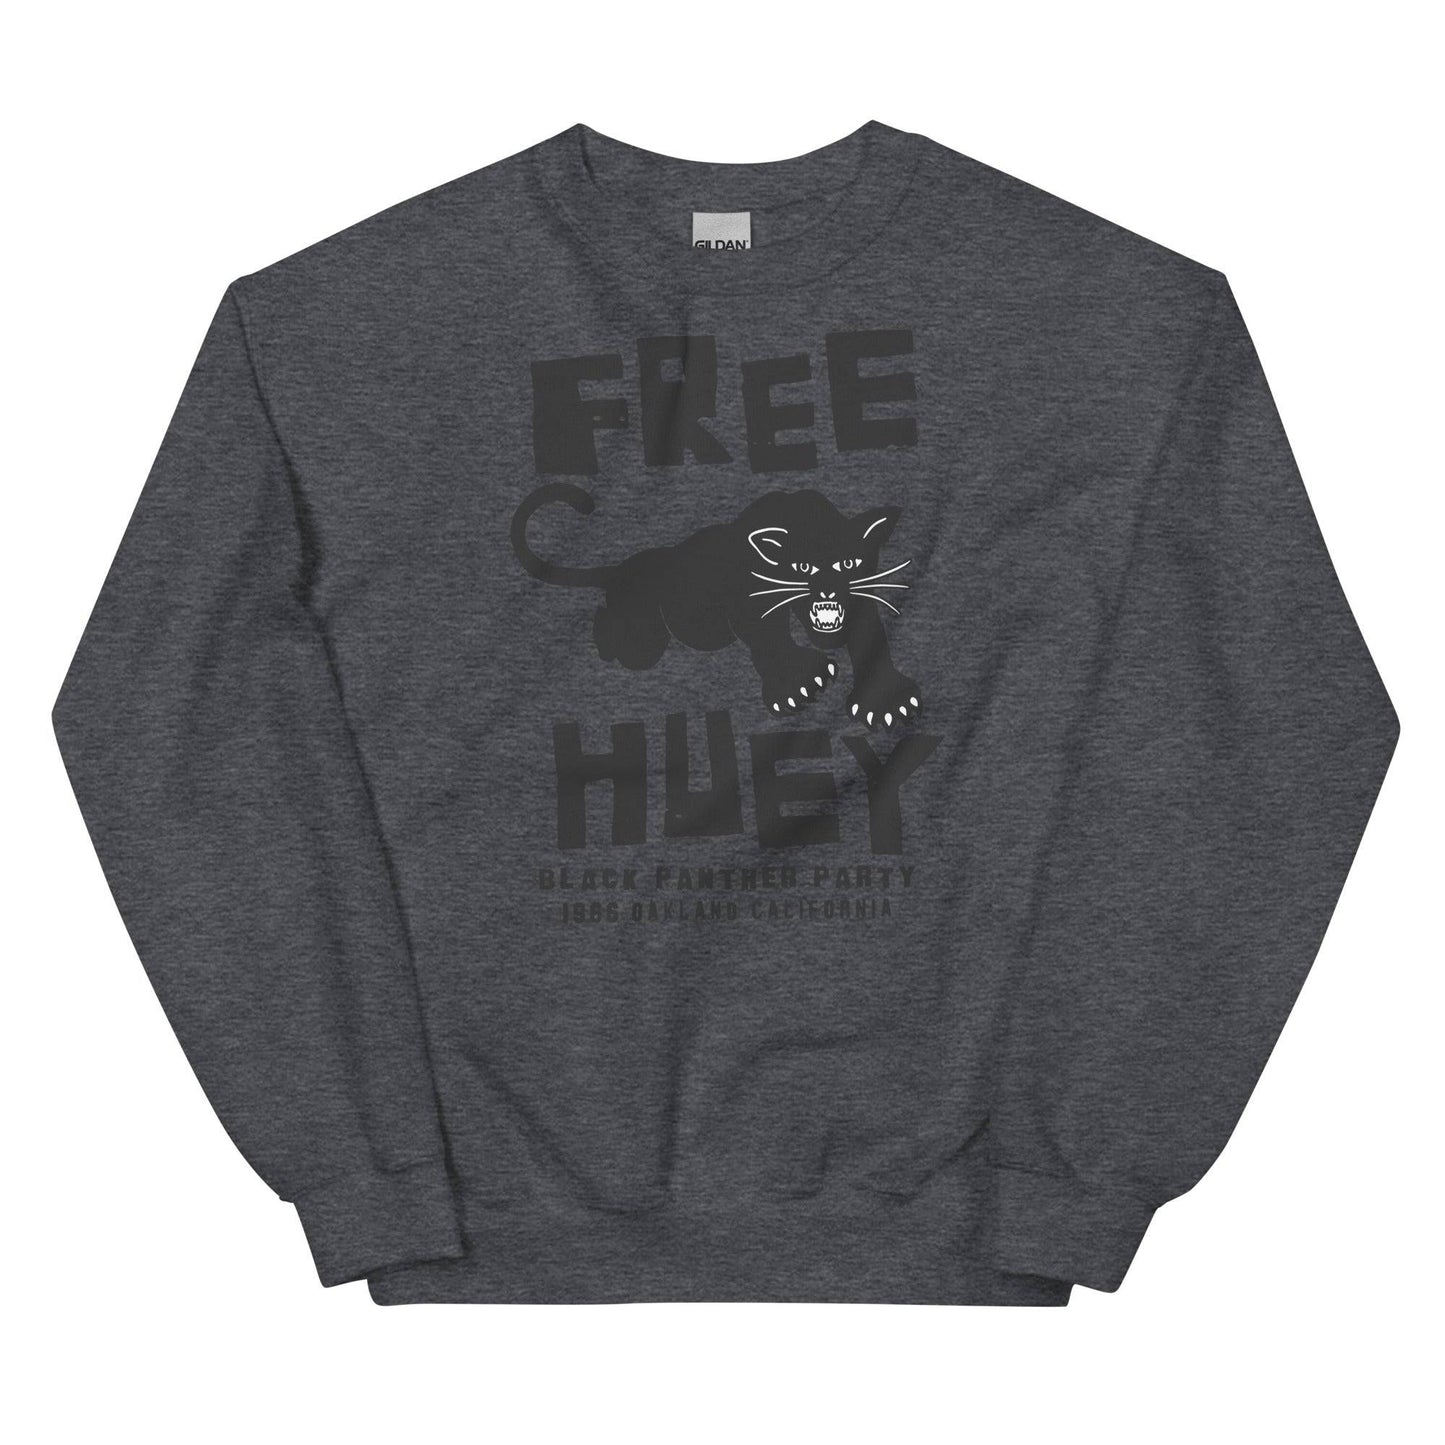 a dark grey sweatshirt with a black panther on it and says free huey